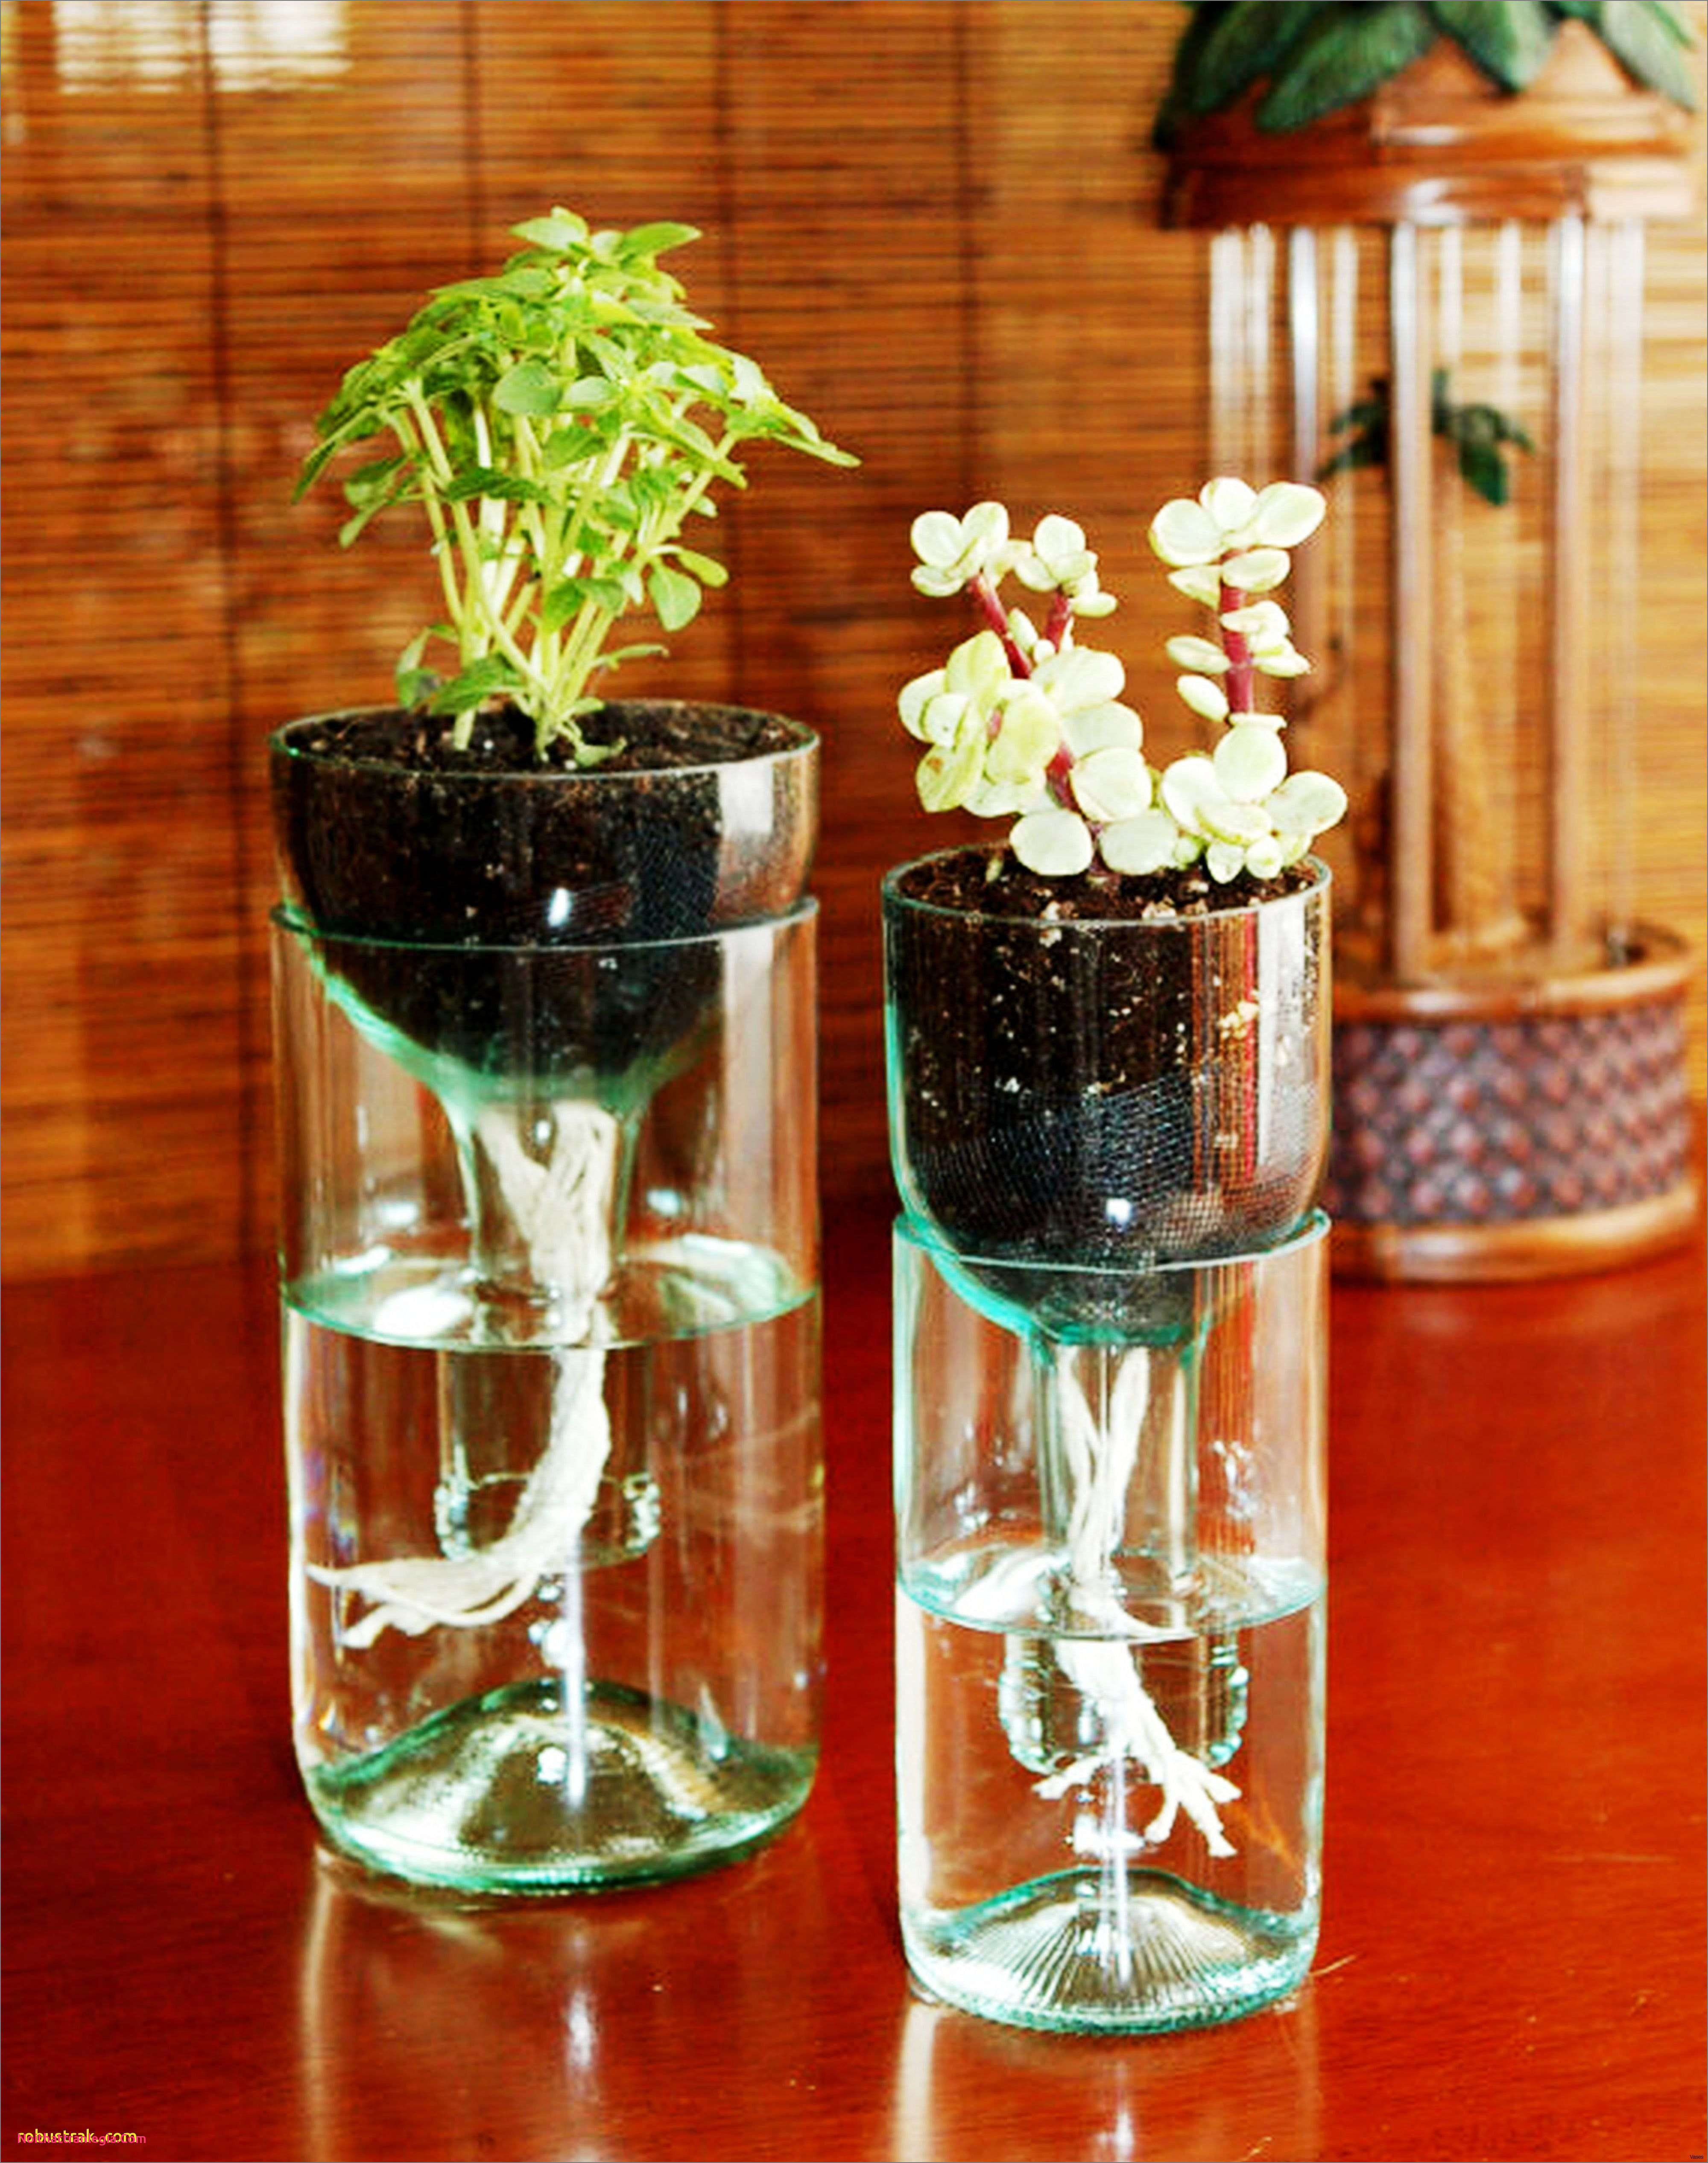 Tall Vases for Sale Cheap Of 20 How to Make Mercury Glass Vases Noithattranlegia Vases Design Pertaining to Glass Bowl Centerpiece Decorating Ideas Awesome Unique Glass Bowl Centerpiece Decorating Ideas